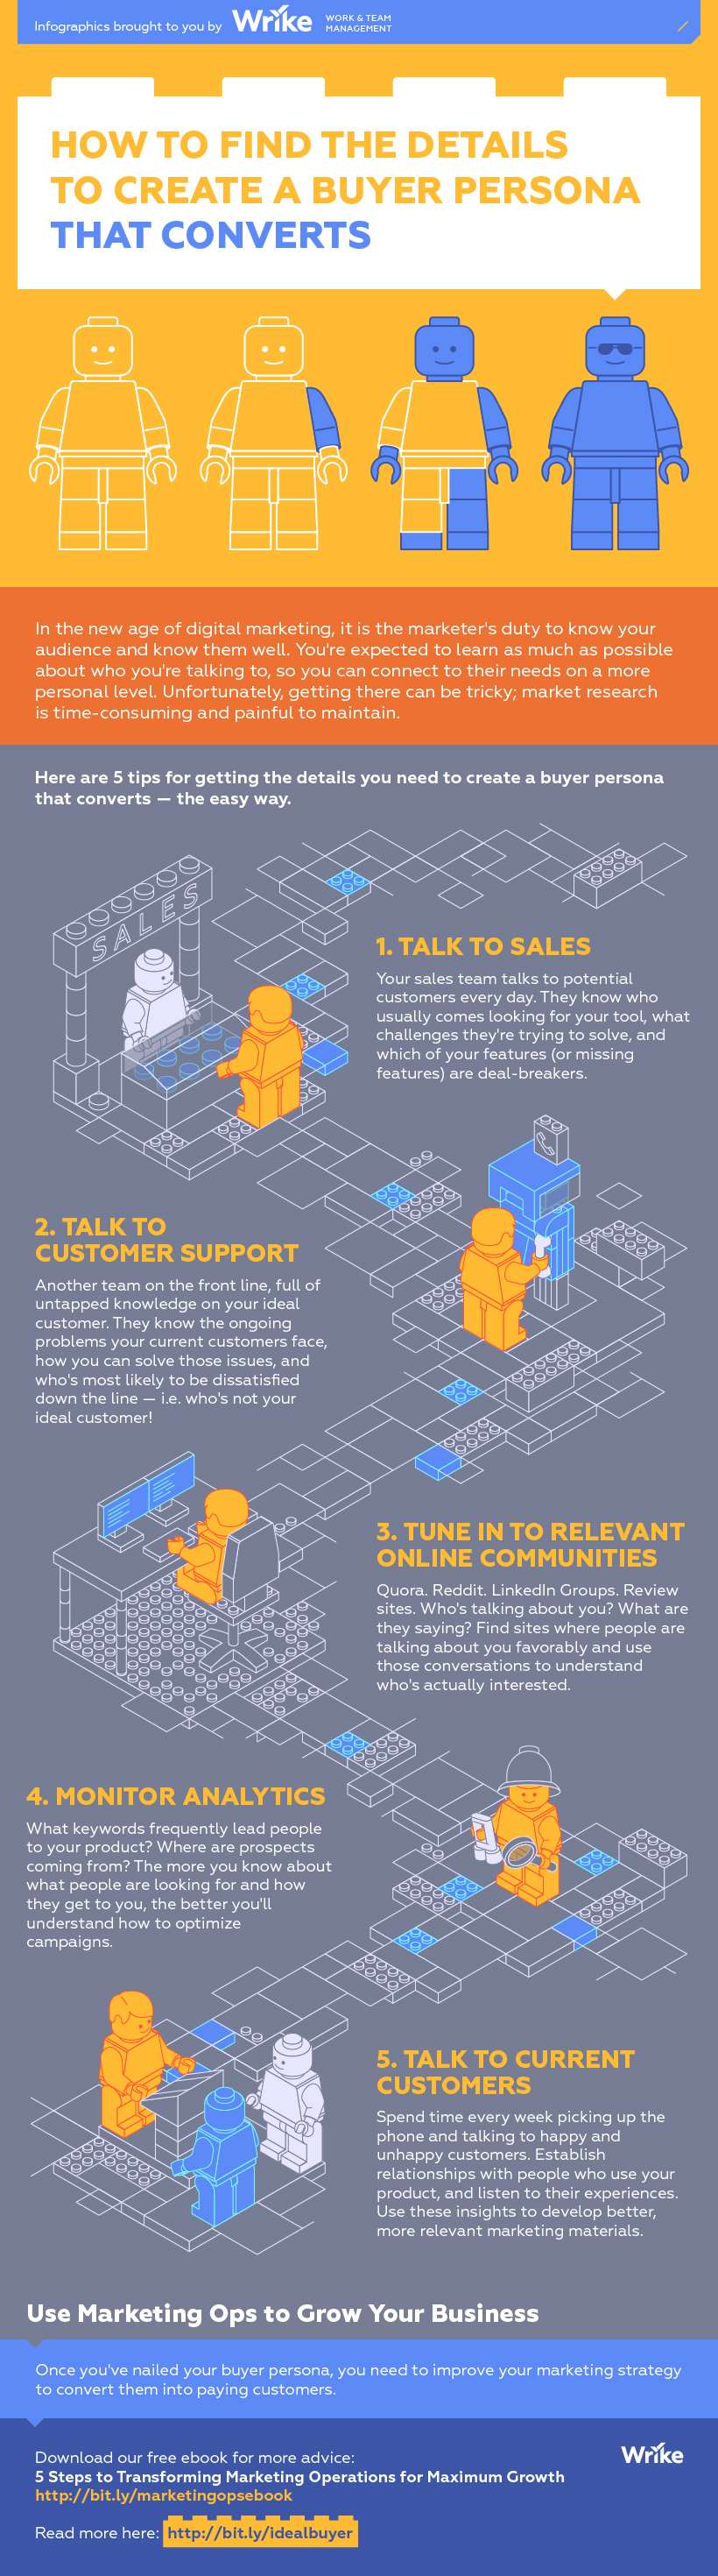 How to Build a Buyer Persona That Converts (Infographic)